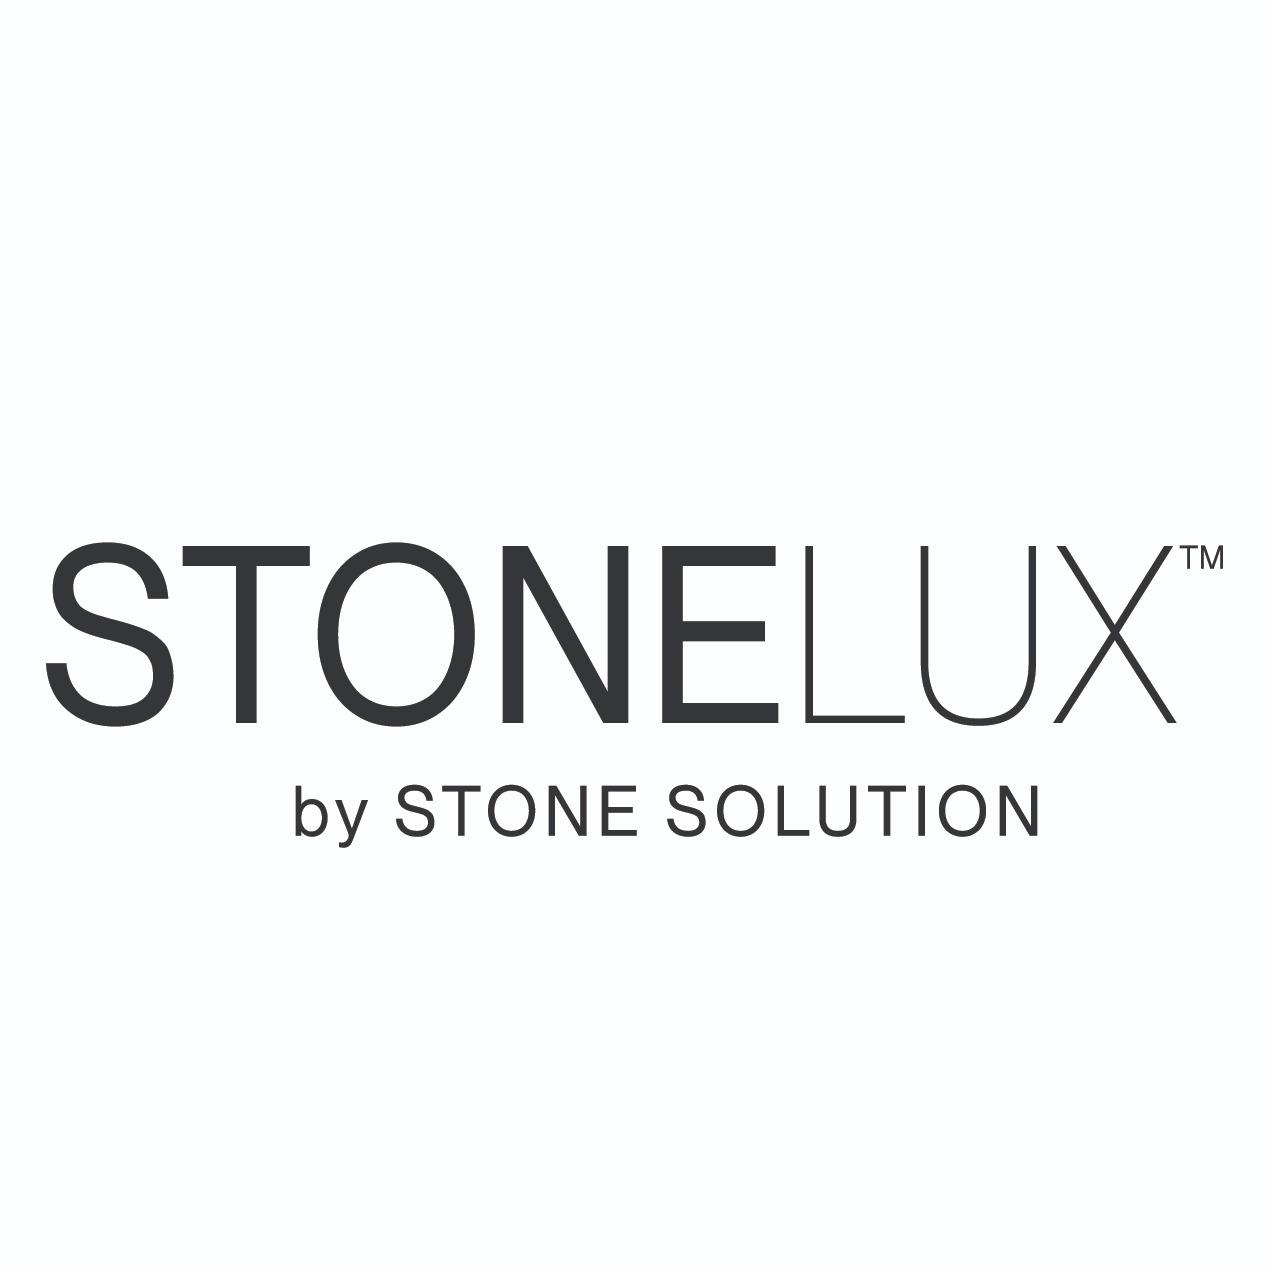 STONELUX by Stone Solution - Chantilly, VA 20151 - (571)353-3311 | ShowMeLocal.com